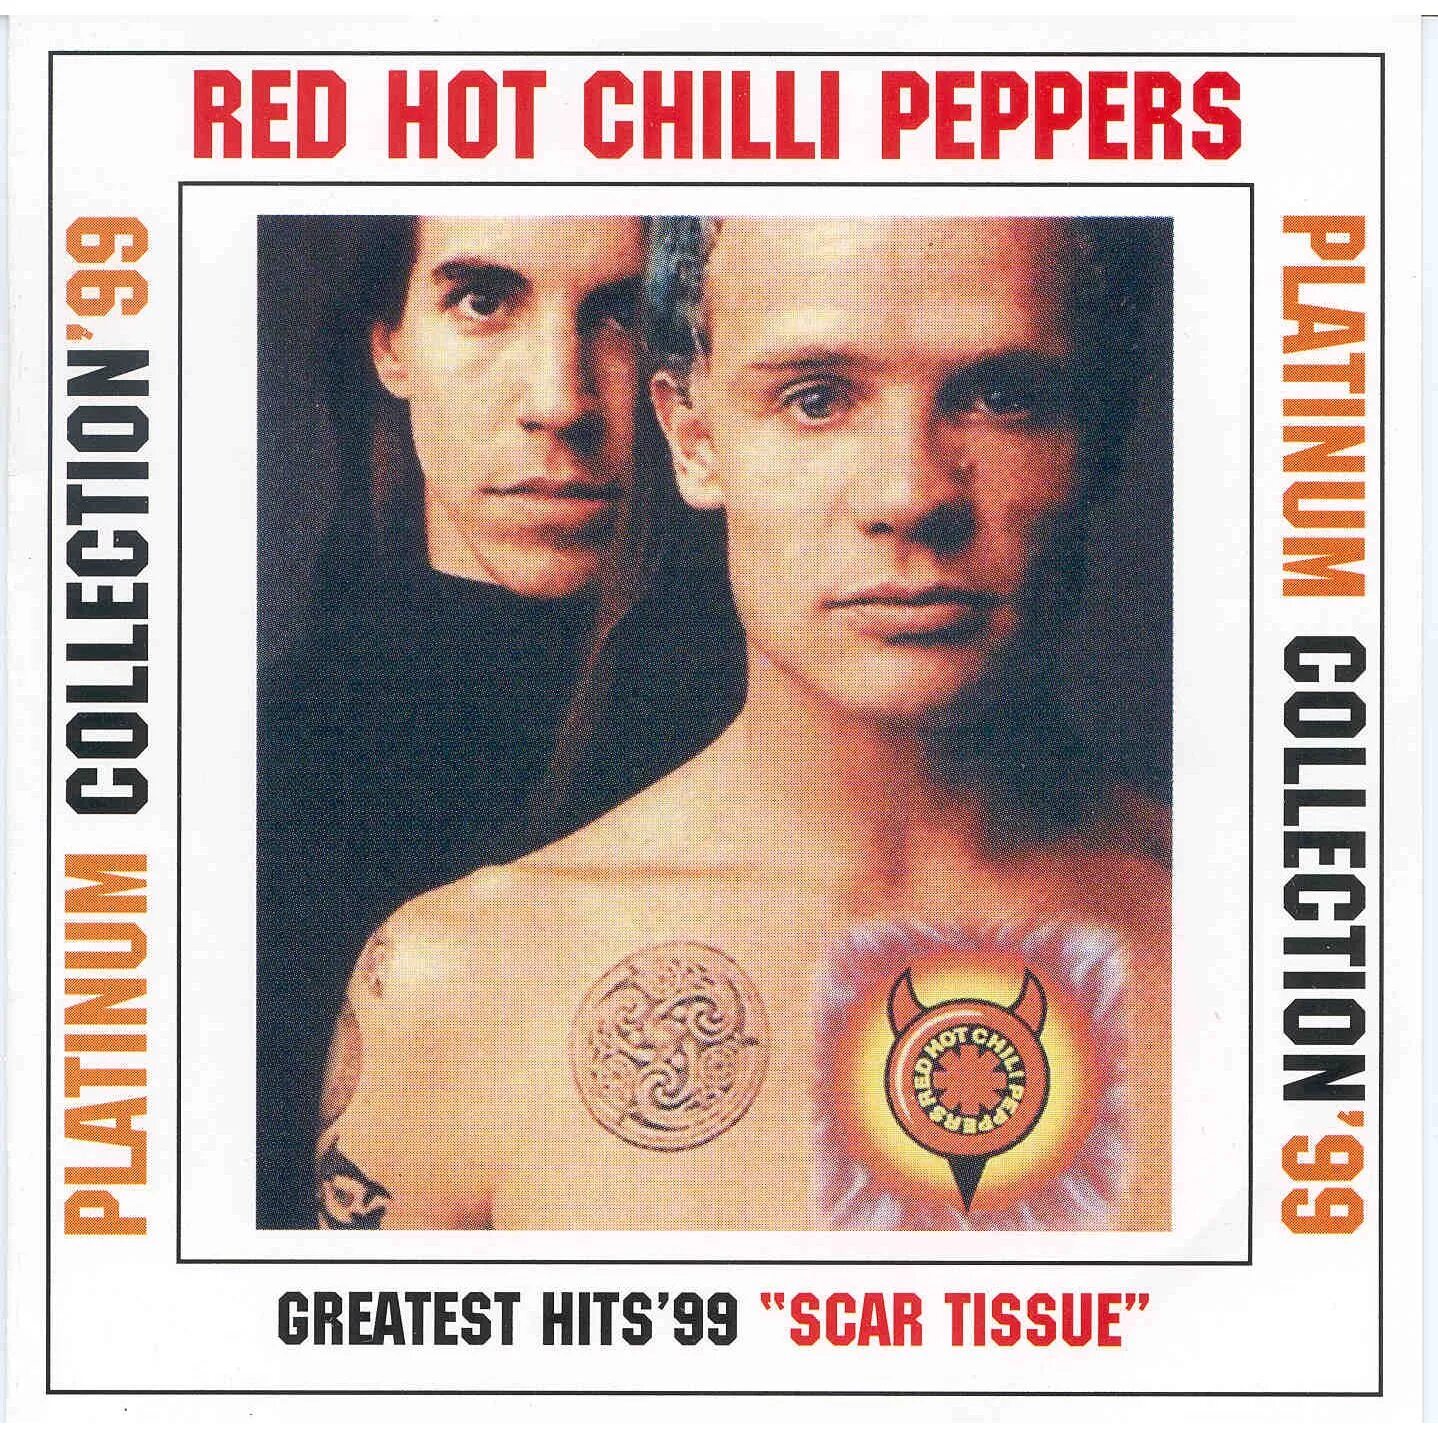 Red hot chili peppers tissue. Ред хот Чили Пепперс. Red hot Chili Peppers обложка. Red hot Chili Peppers альбомы. RHCP обложки альбомов.